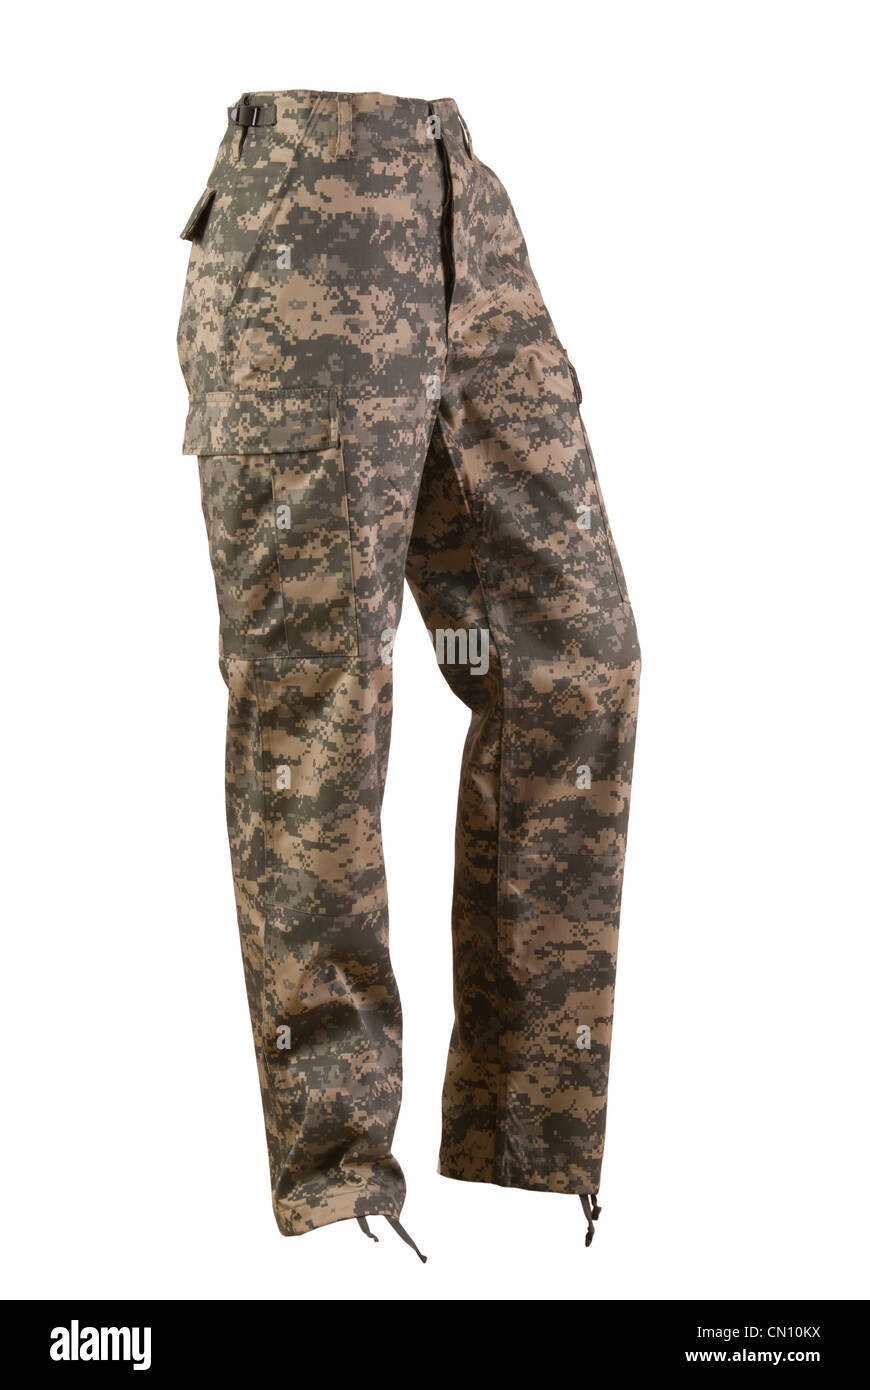 WWII US Army Camouflage HBT Trousers